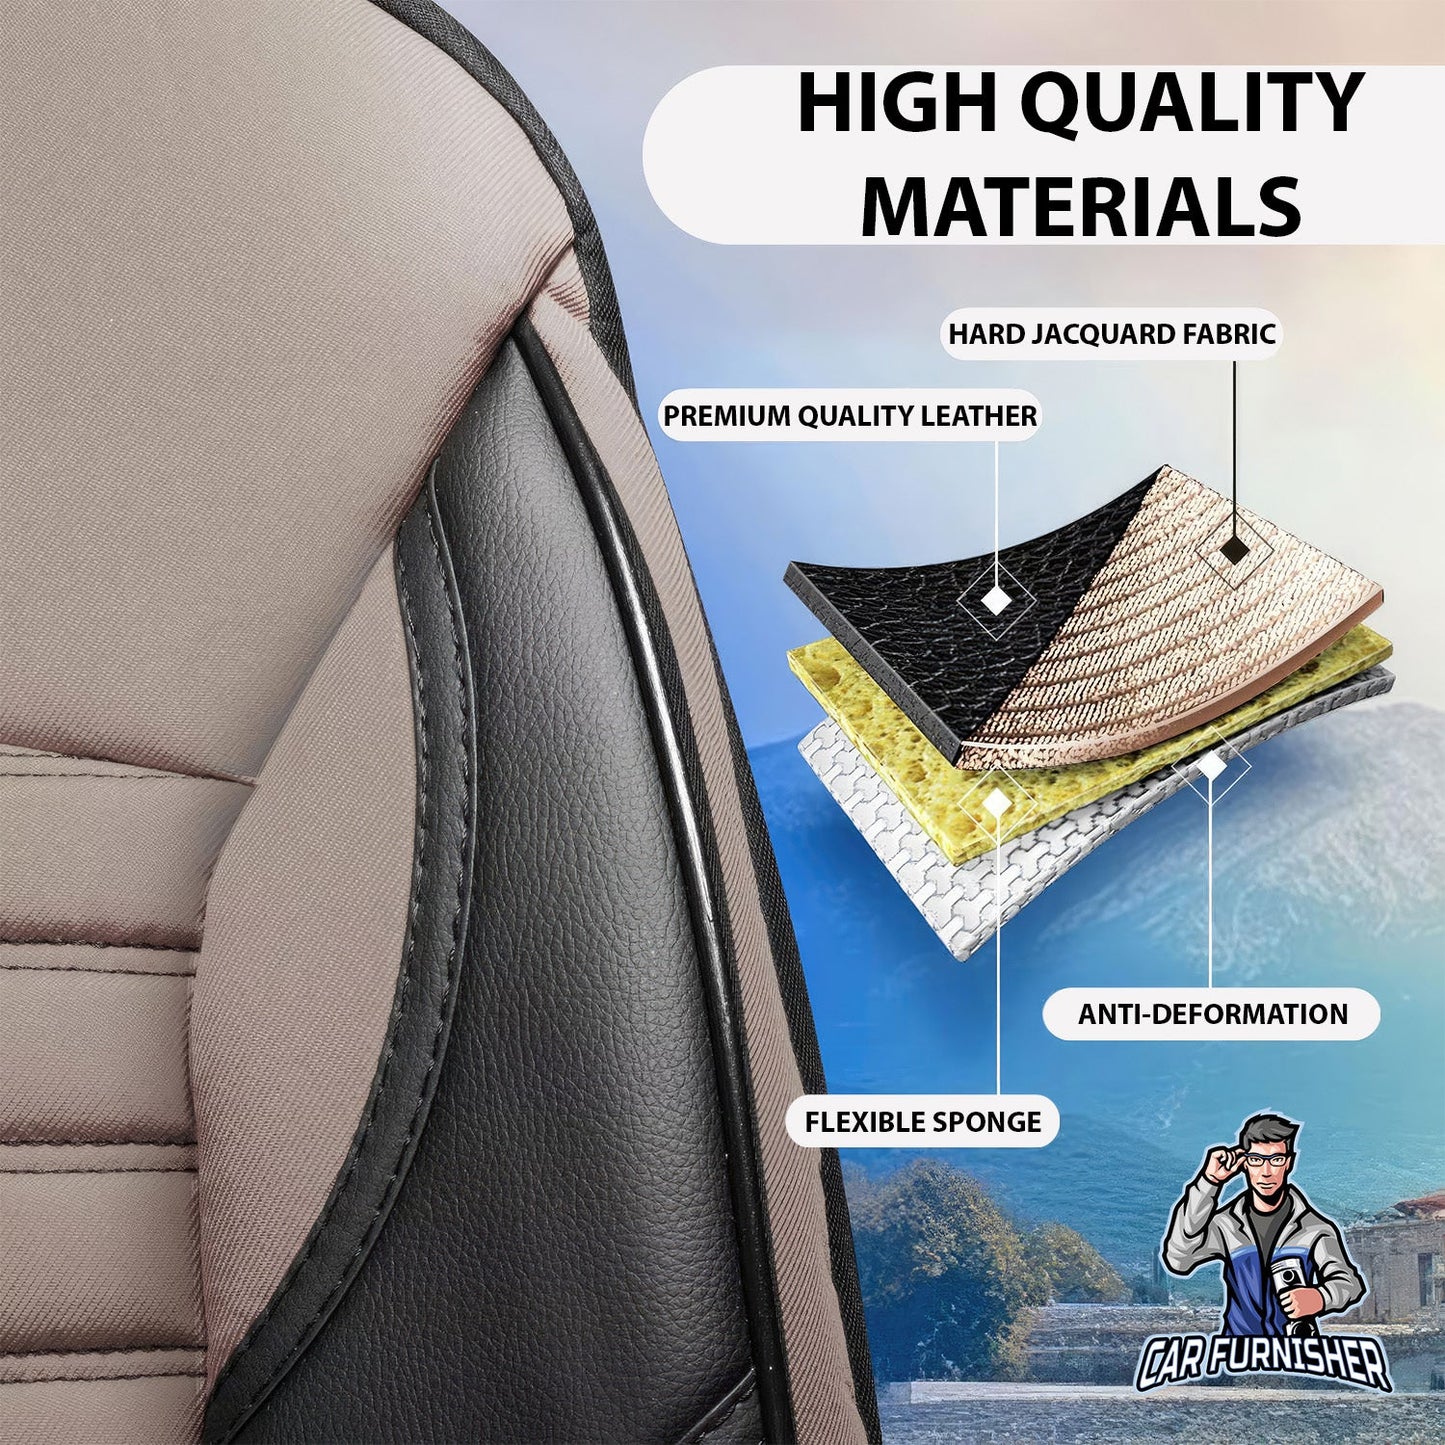 Volkswagen Jetta Seat Covers Athens Design Beige 5 Seats + Headrests (Full Set) Leather & Jacquard Fabric